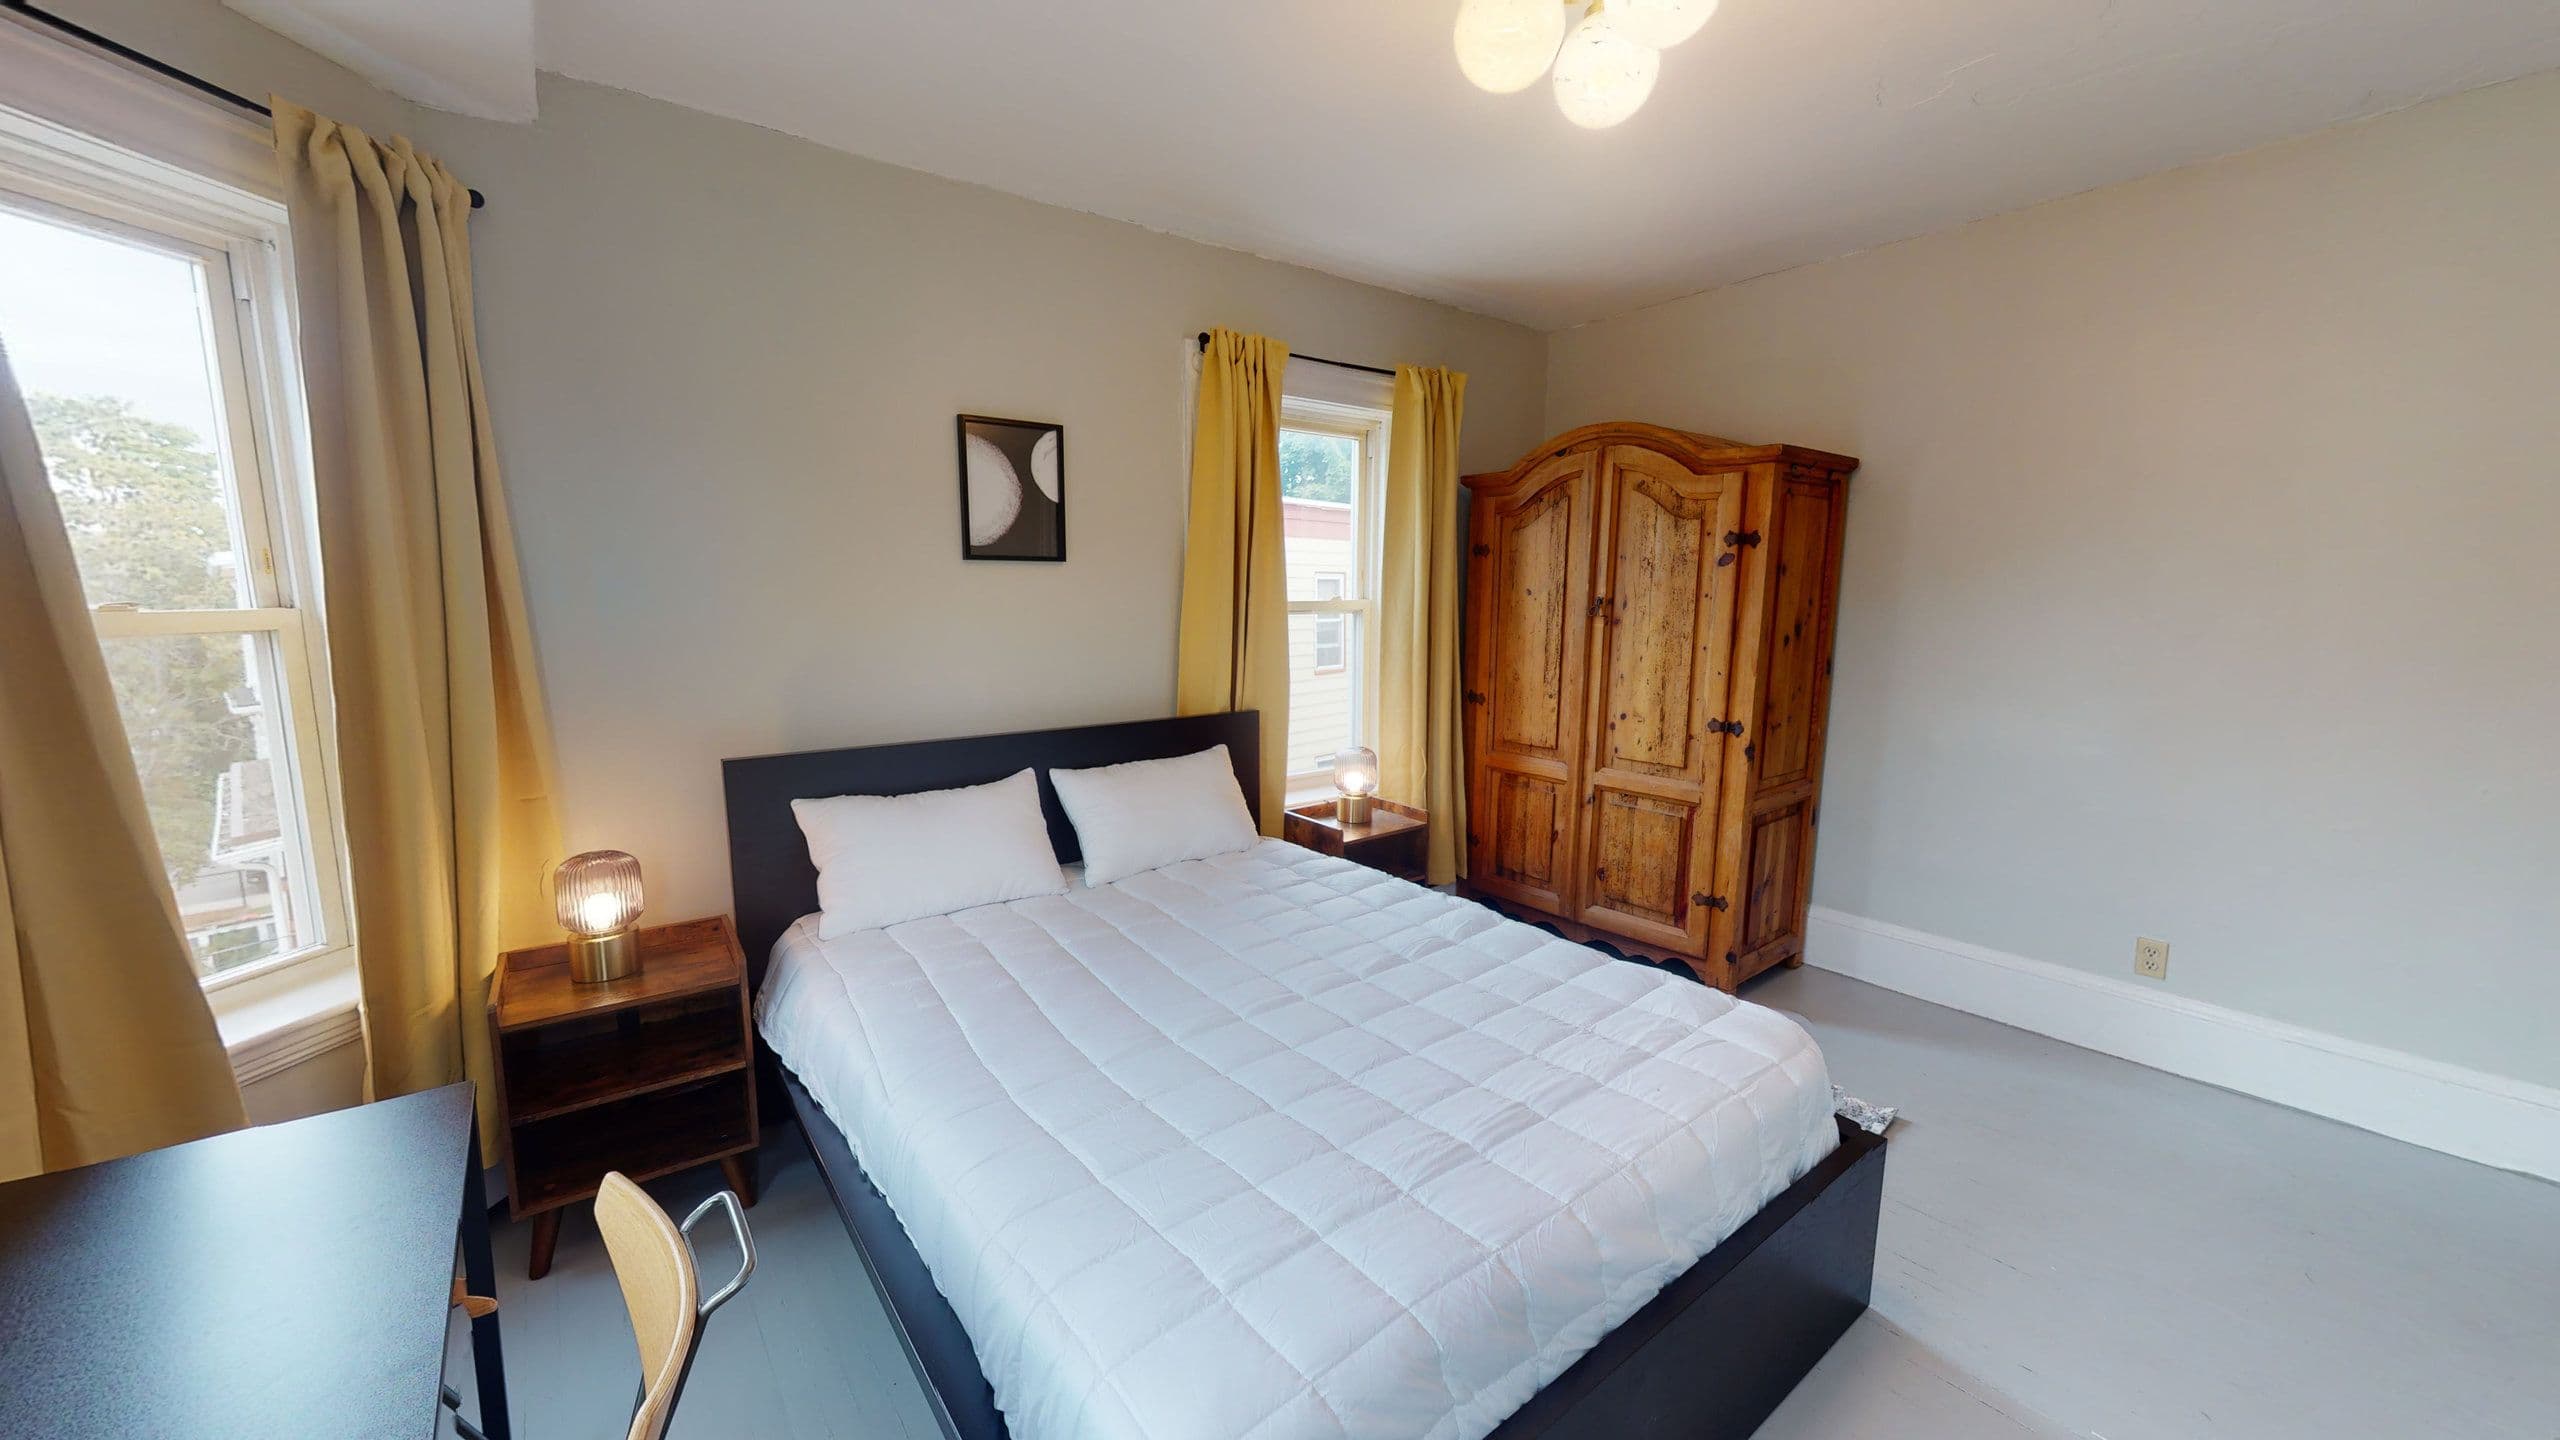 Photo 2 of #1359: Queen Bedroom A at June Homes